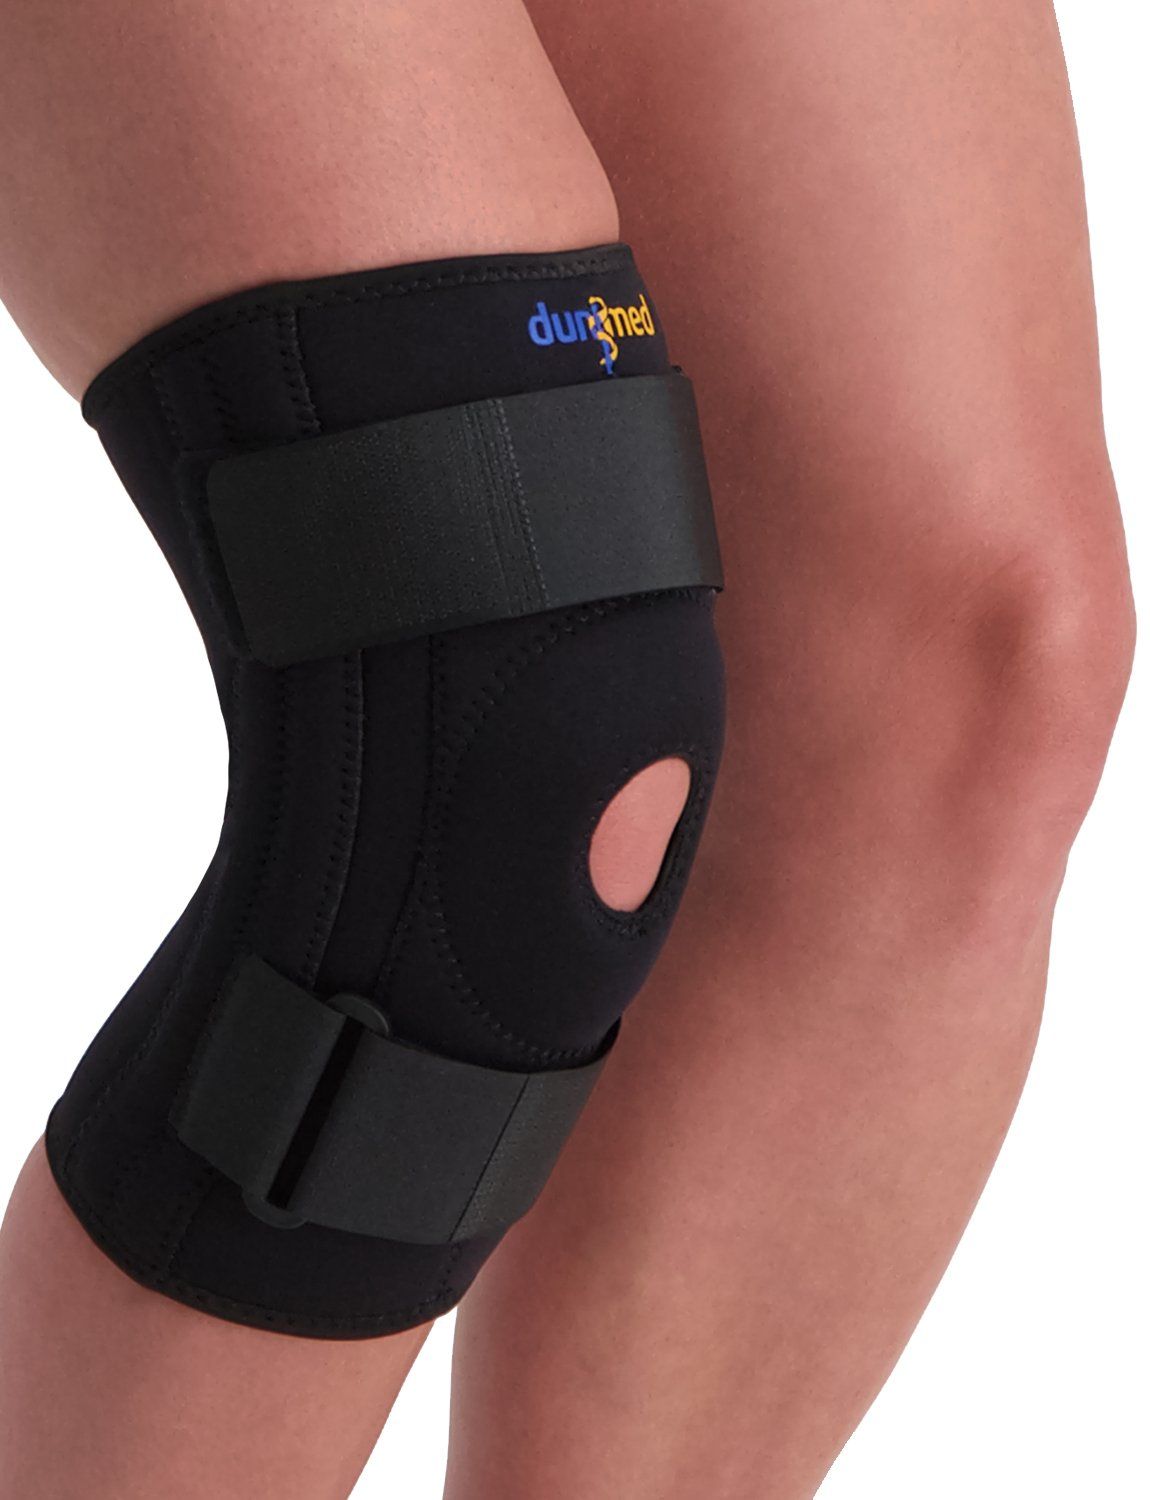 dunimed knee support with busks for sale